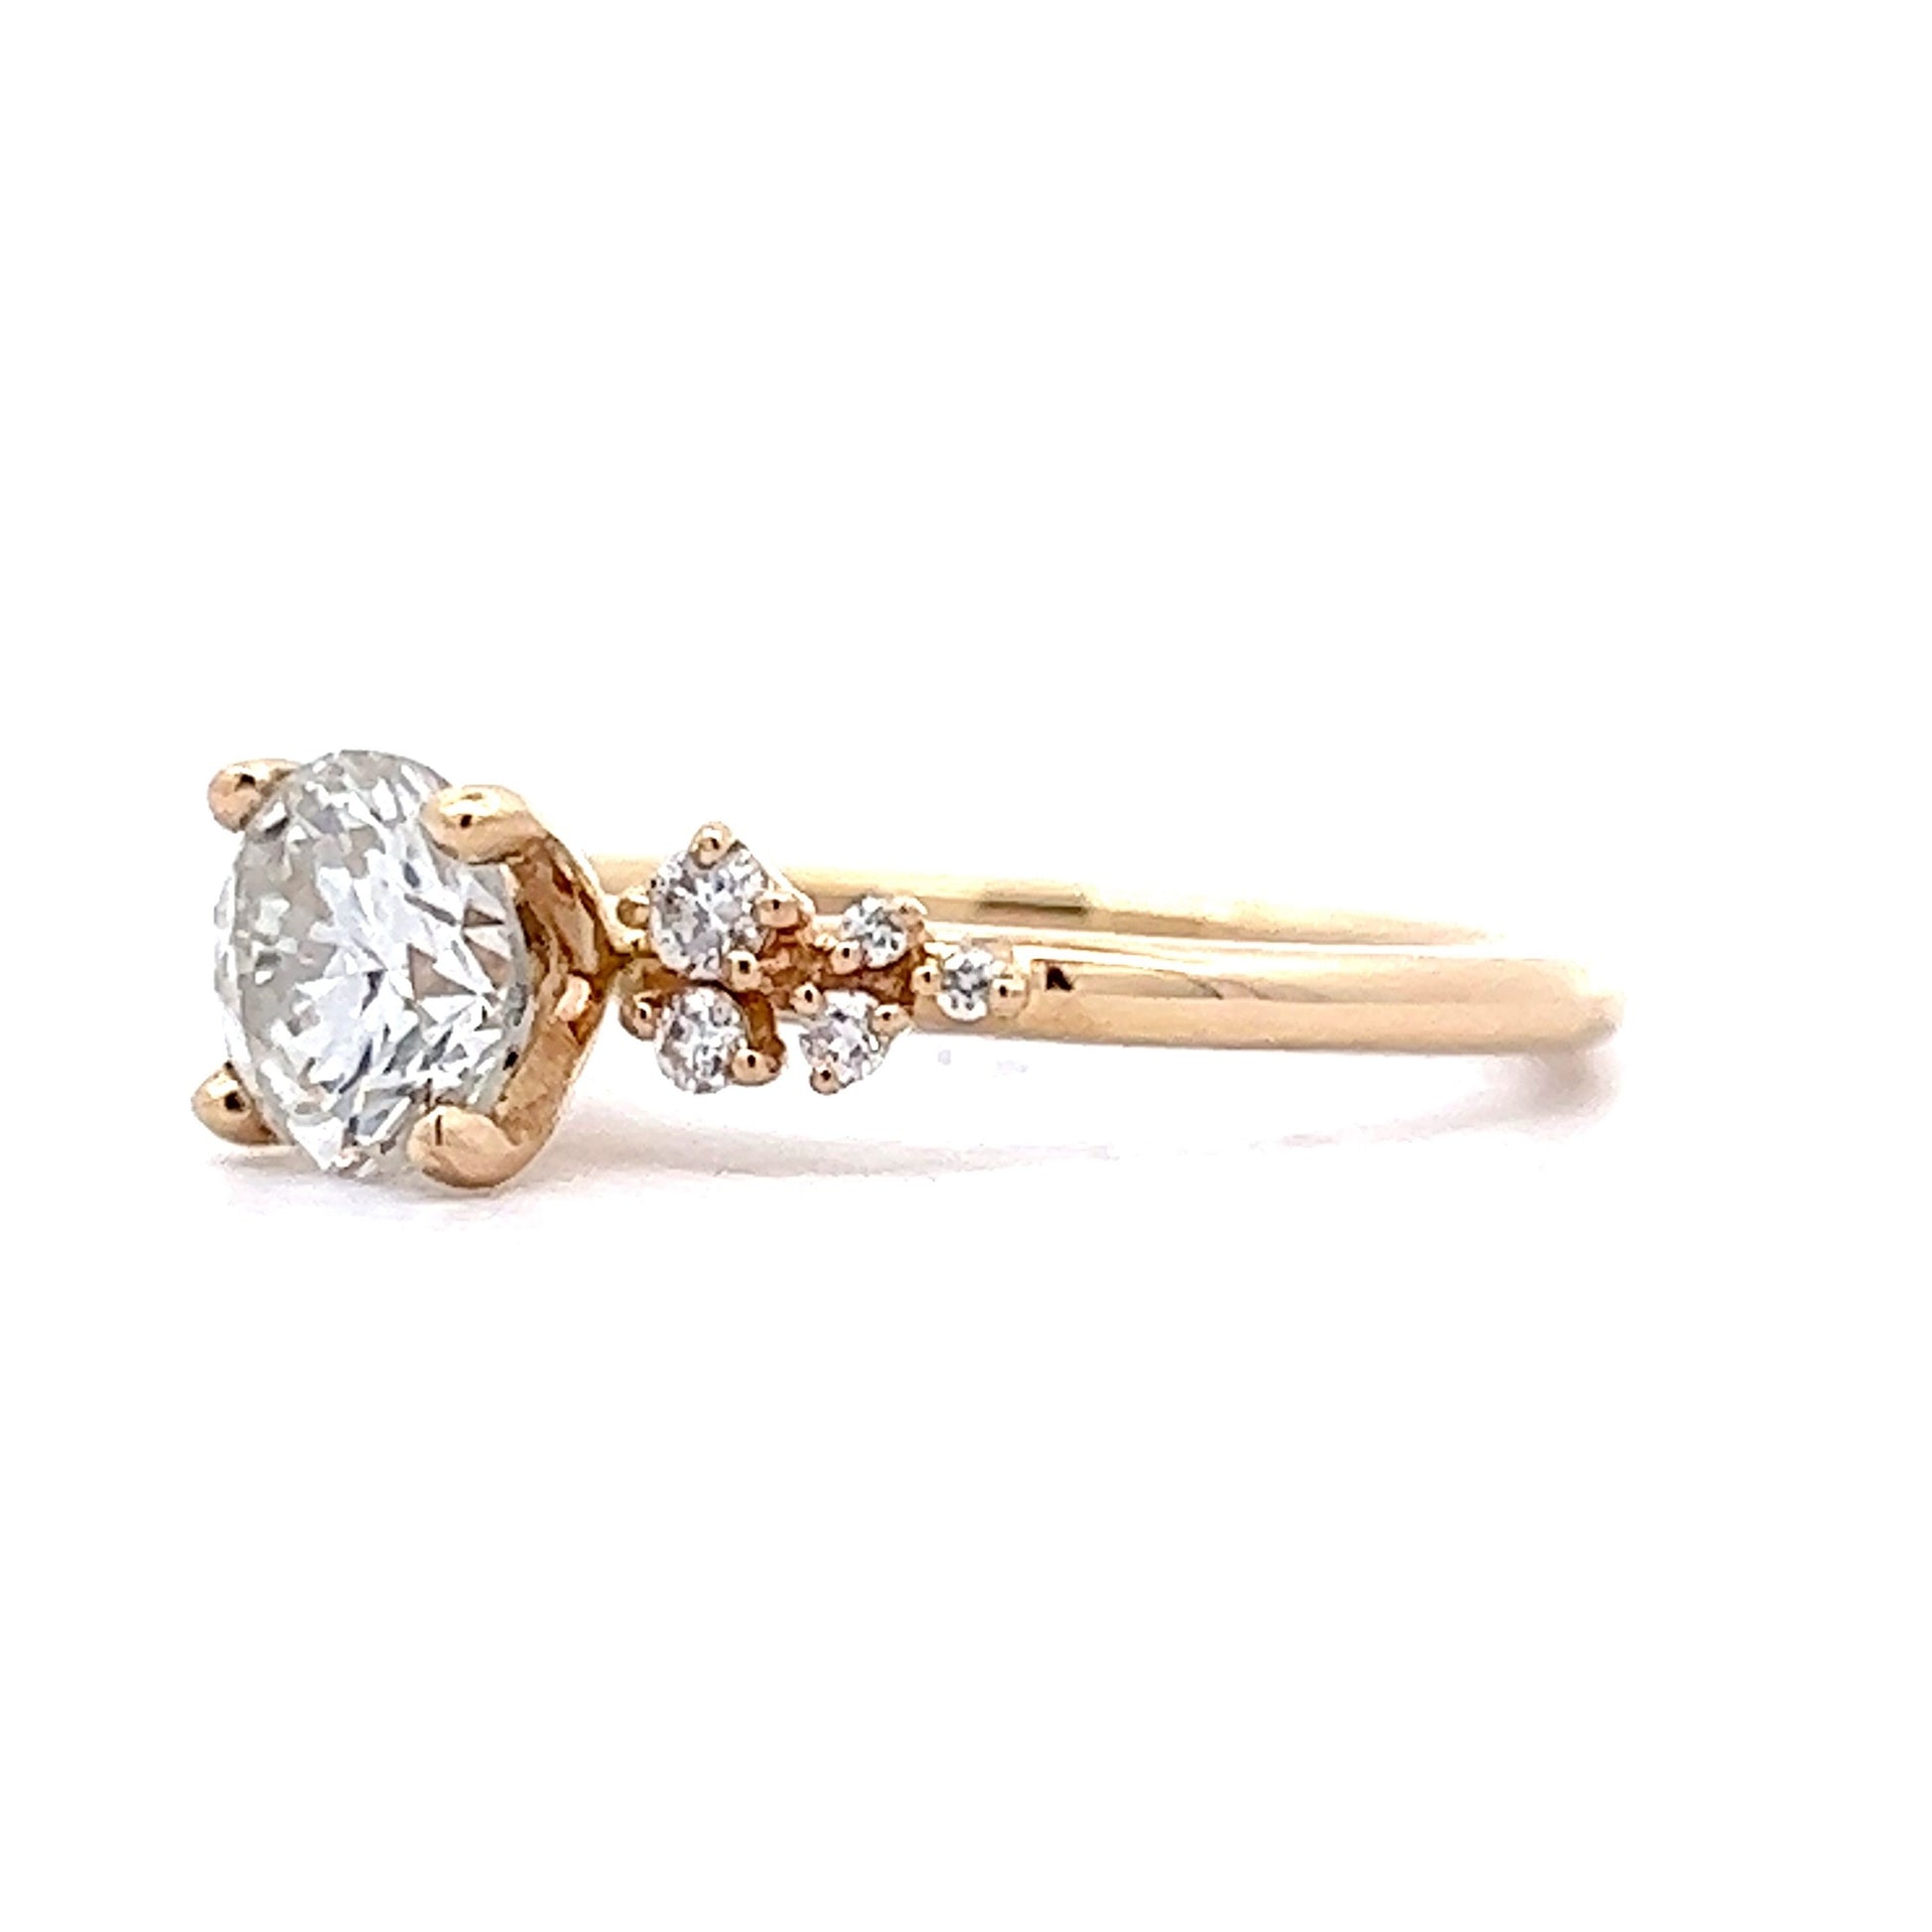 1.01 Solitaire Diamond Engagement Ring in 14k Yellow Gold